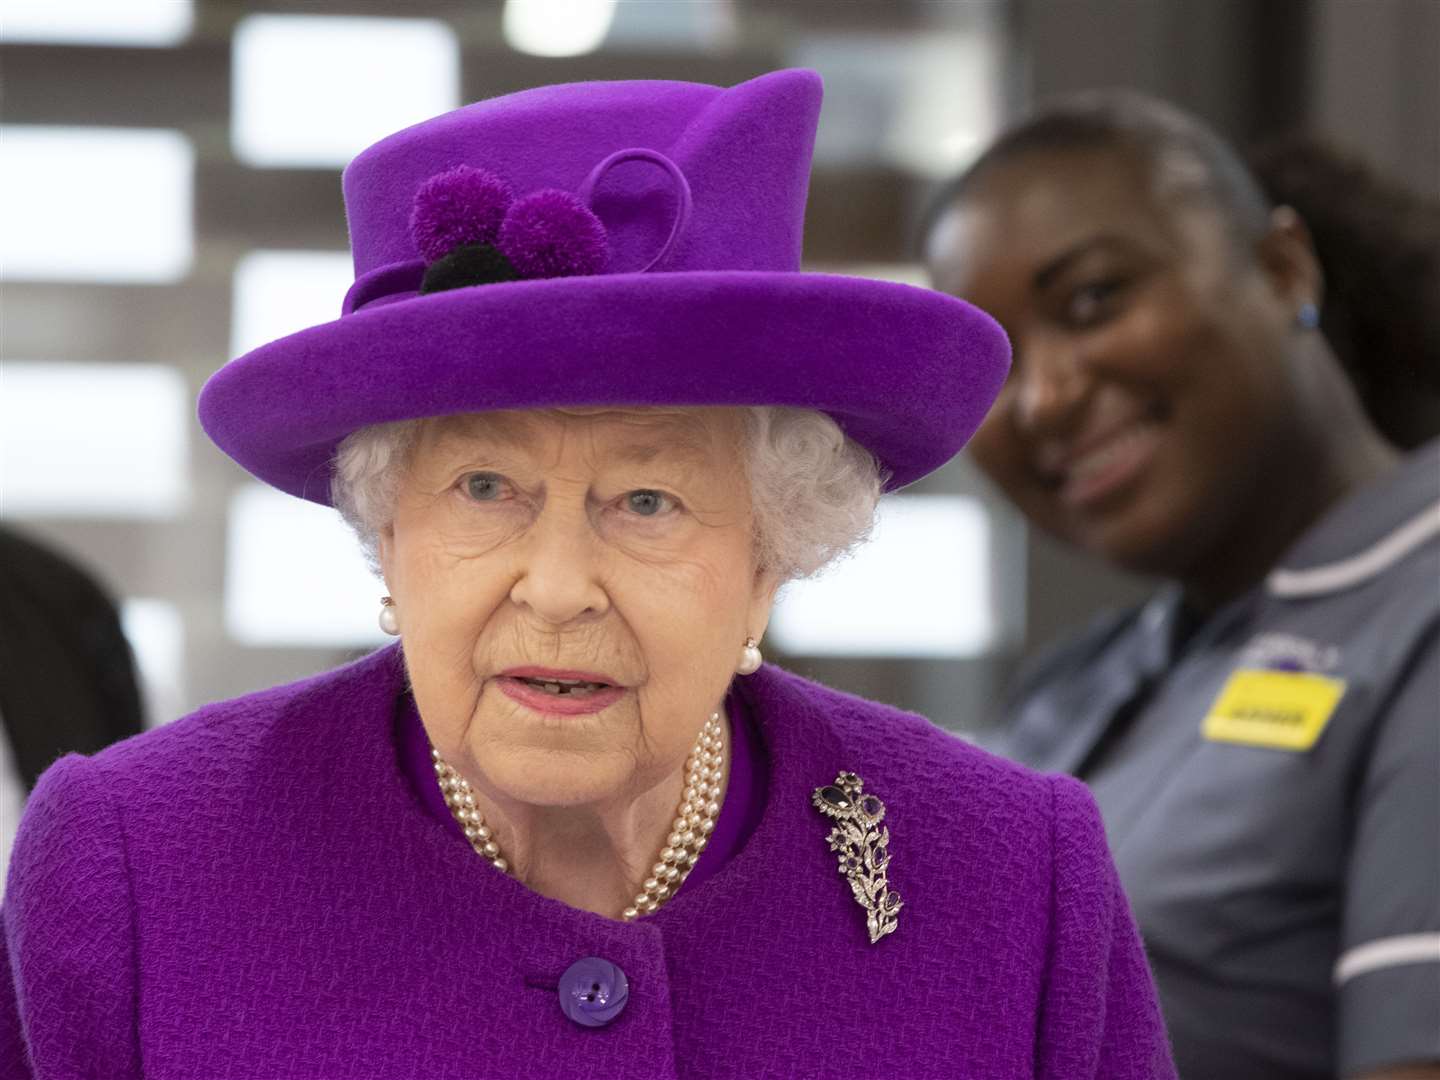 The Queen told the nation ‘we will succeed – and that success will belong to every one of us’ (Heathcliff O’Malley/Daily Telegraph)